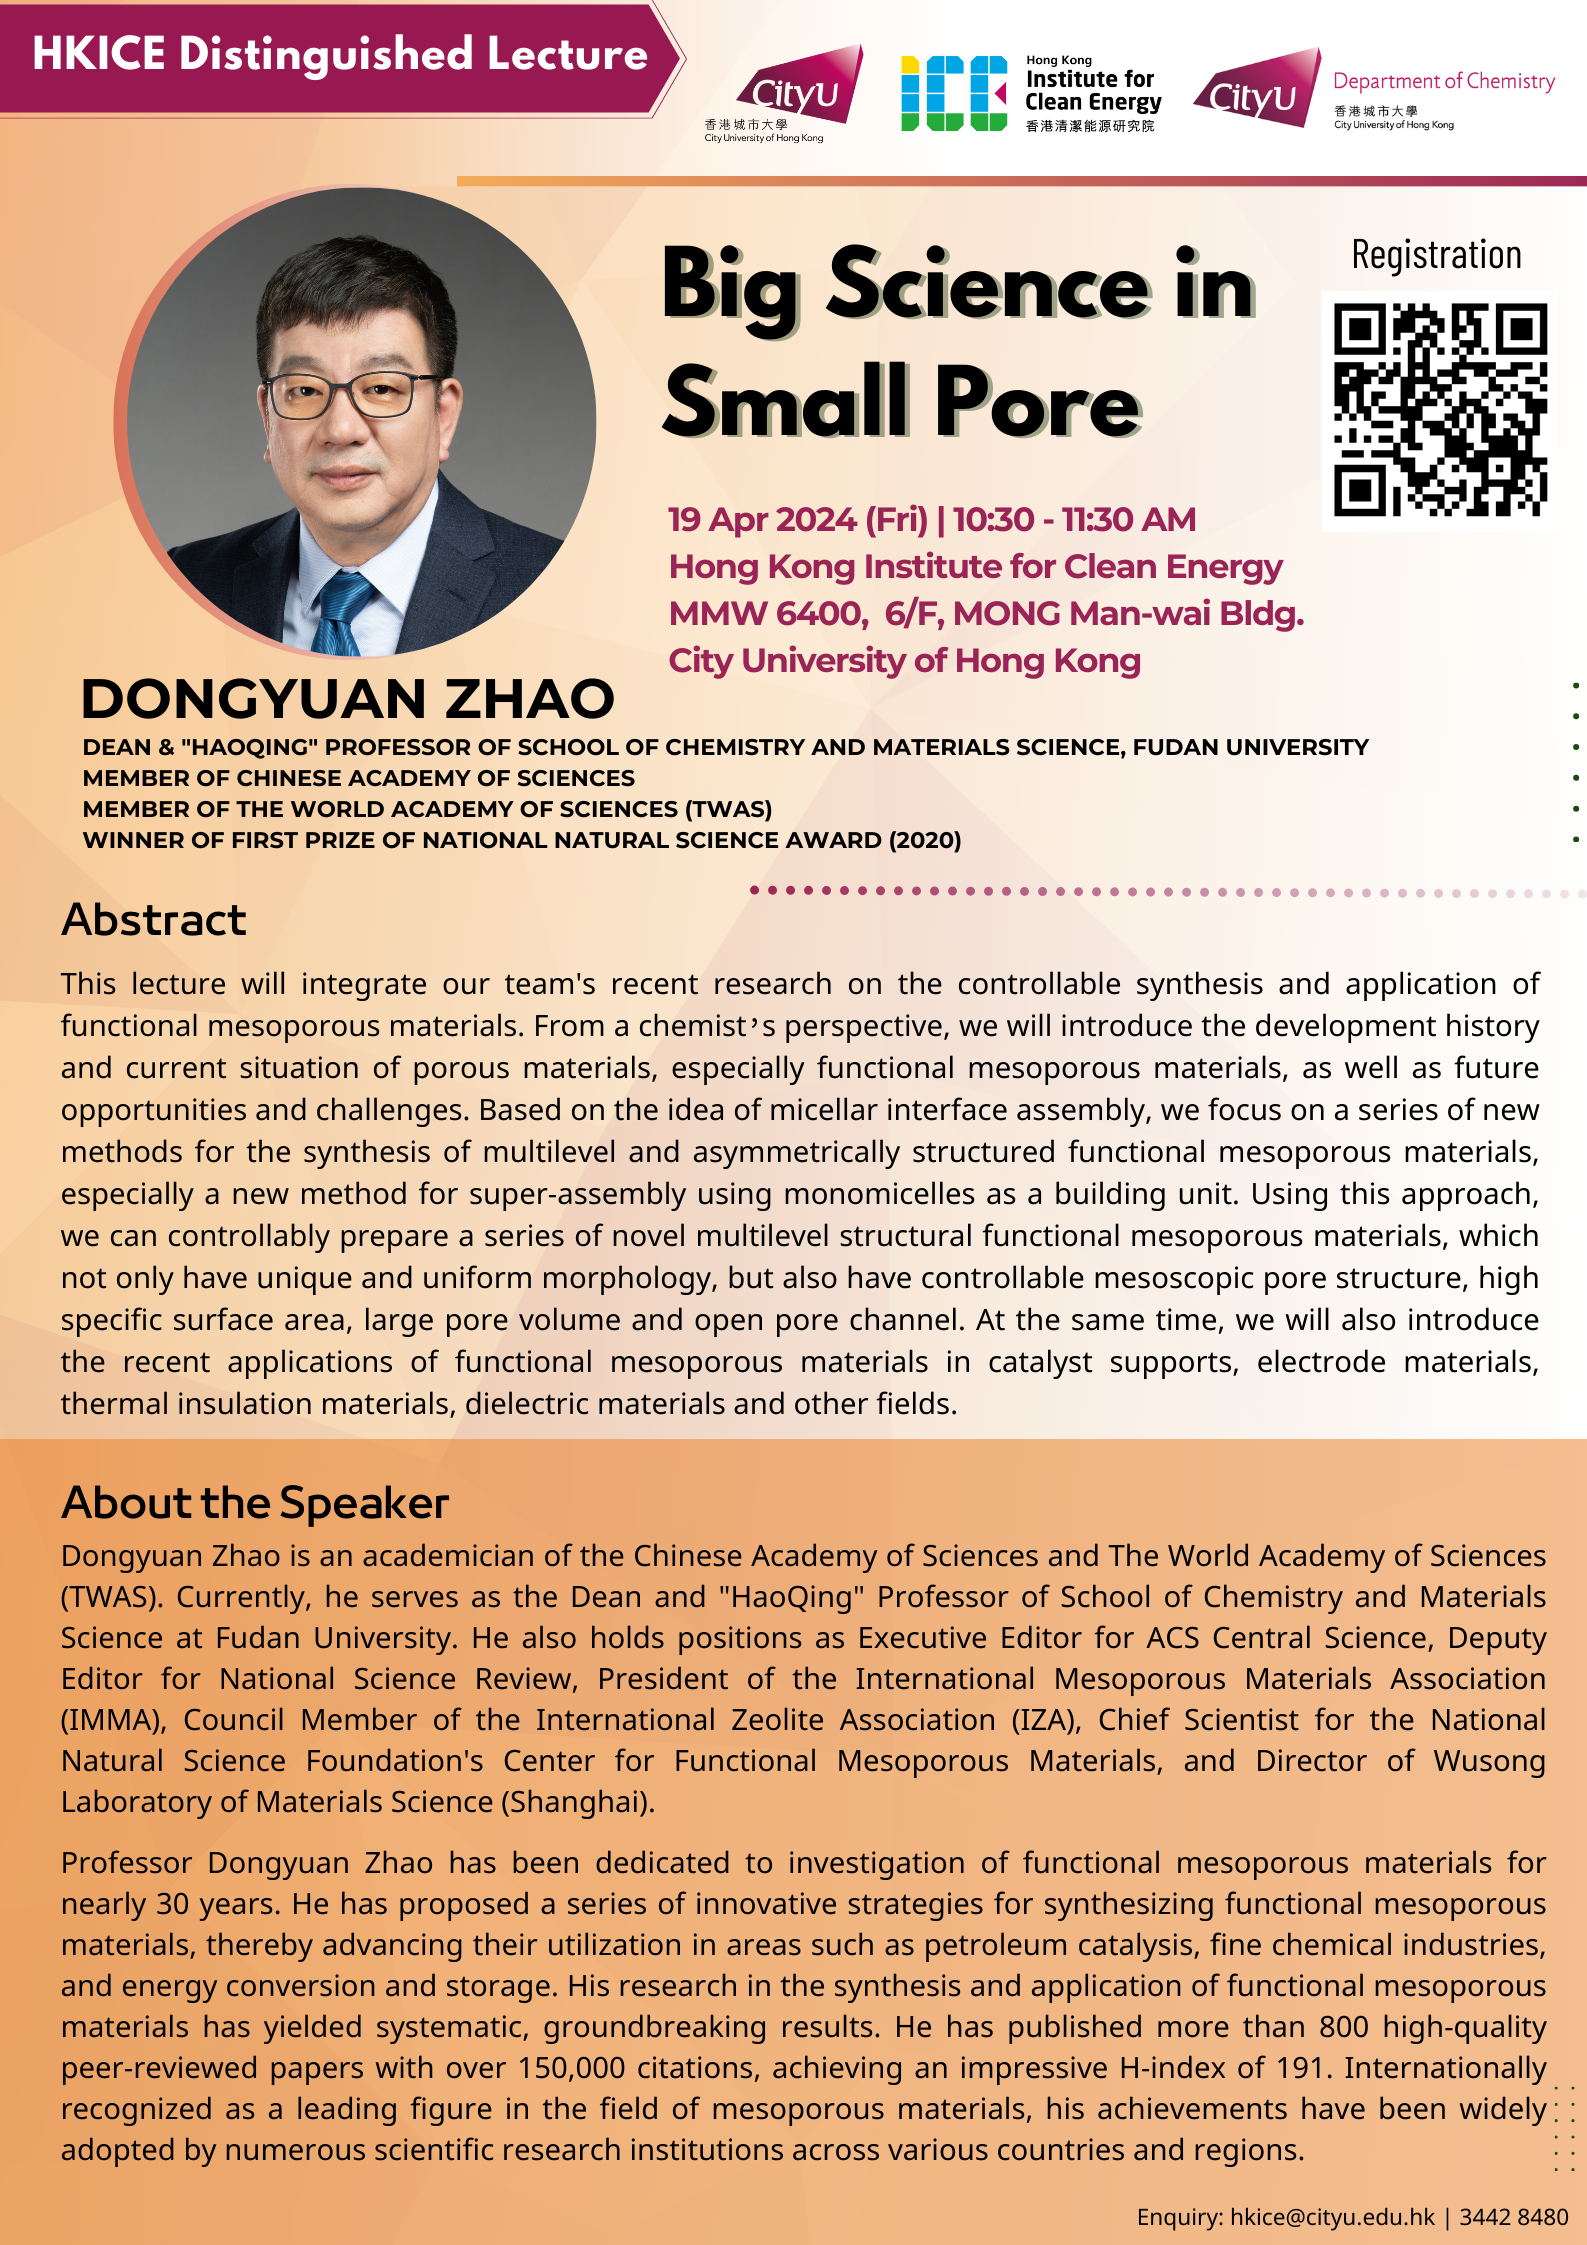 HKICE Distinguished Lecture by Prof. Dongyuan Zhao | 19 Apr (Fri), 10:30am 